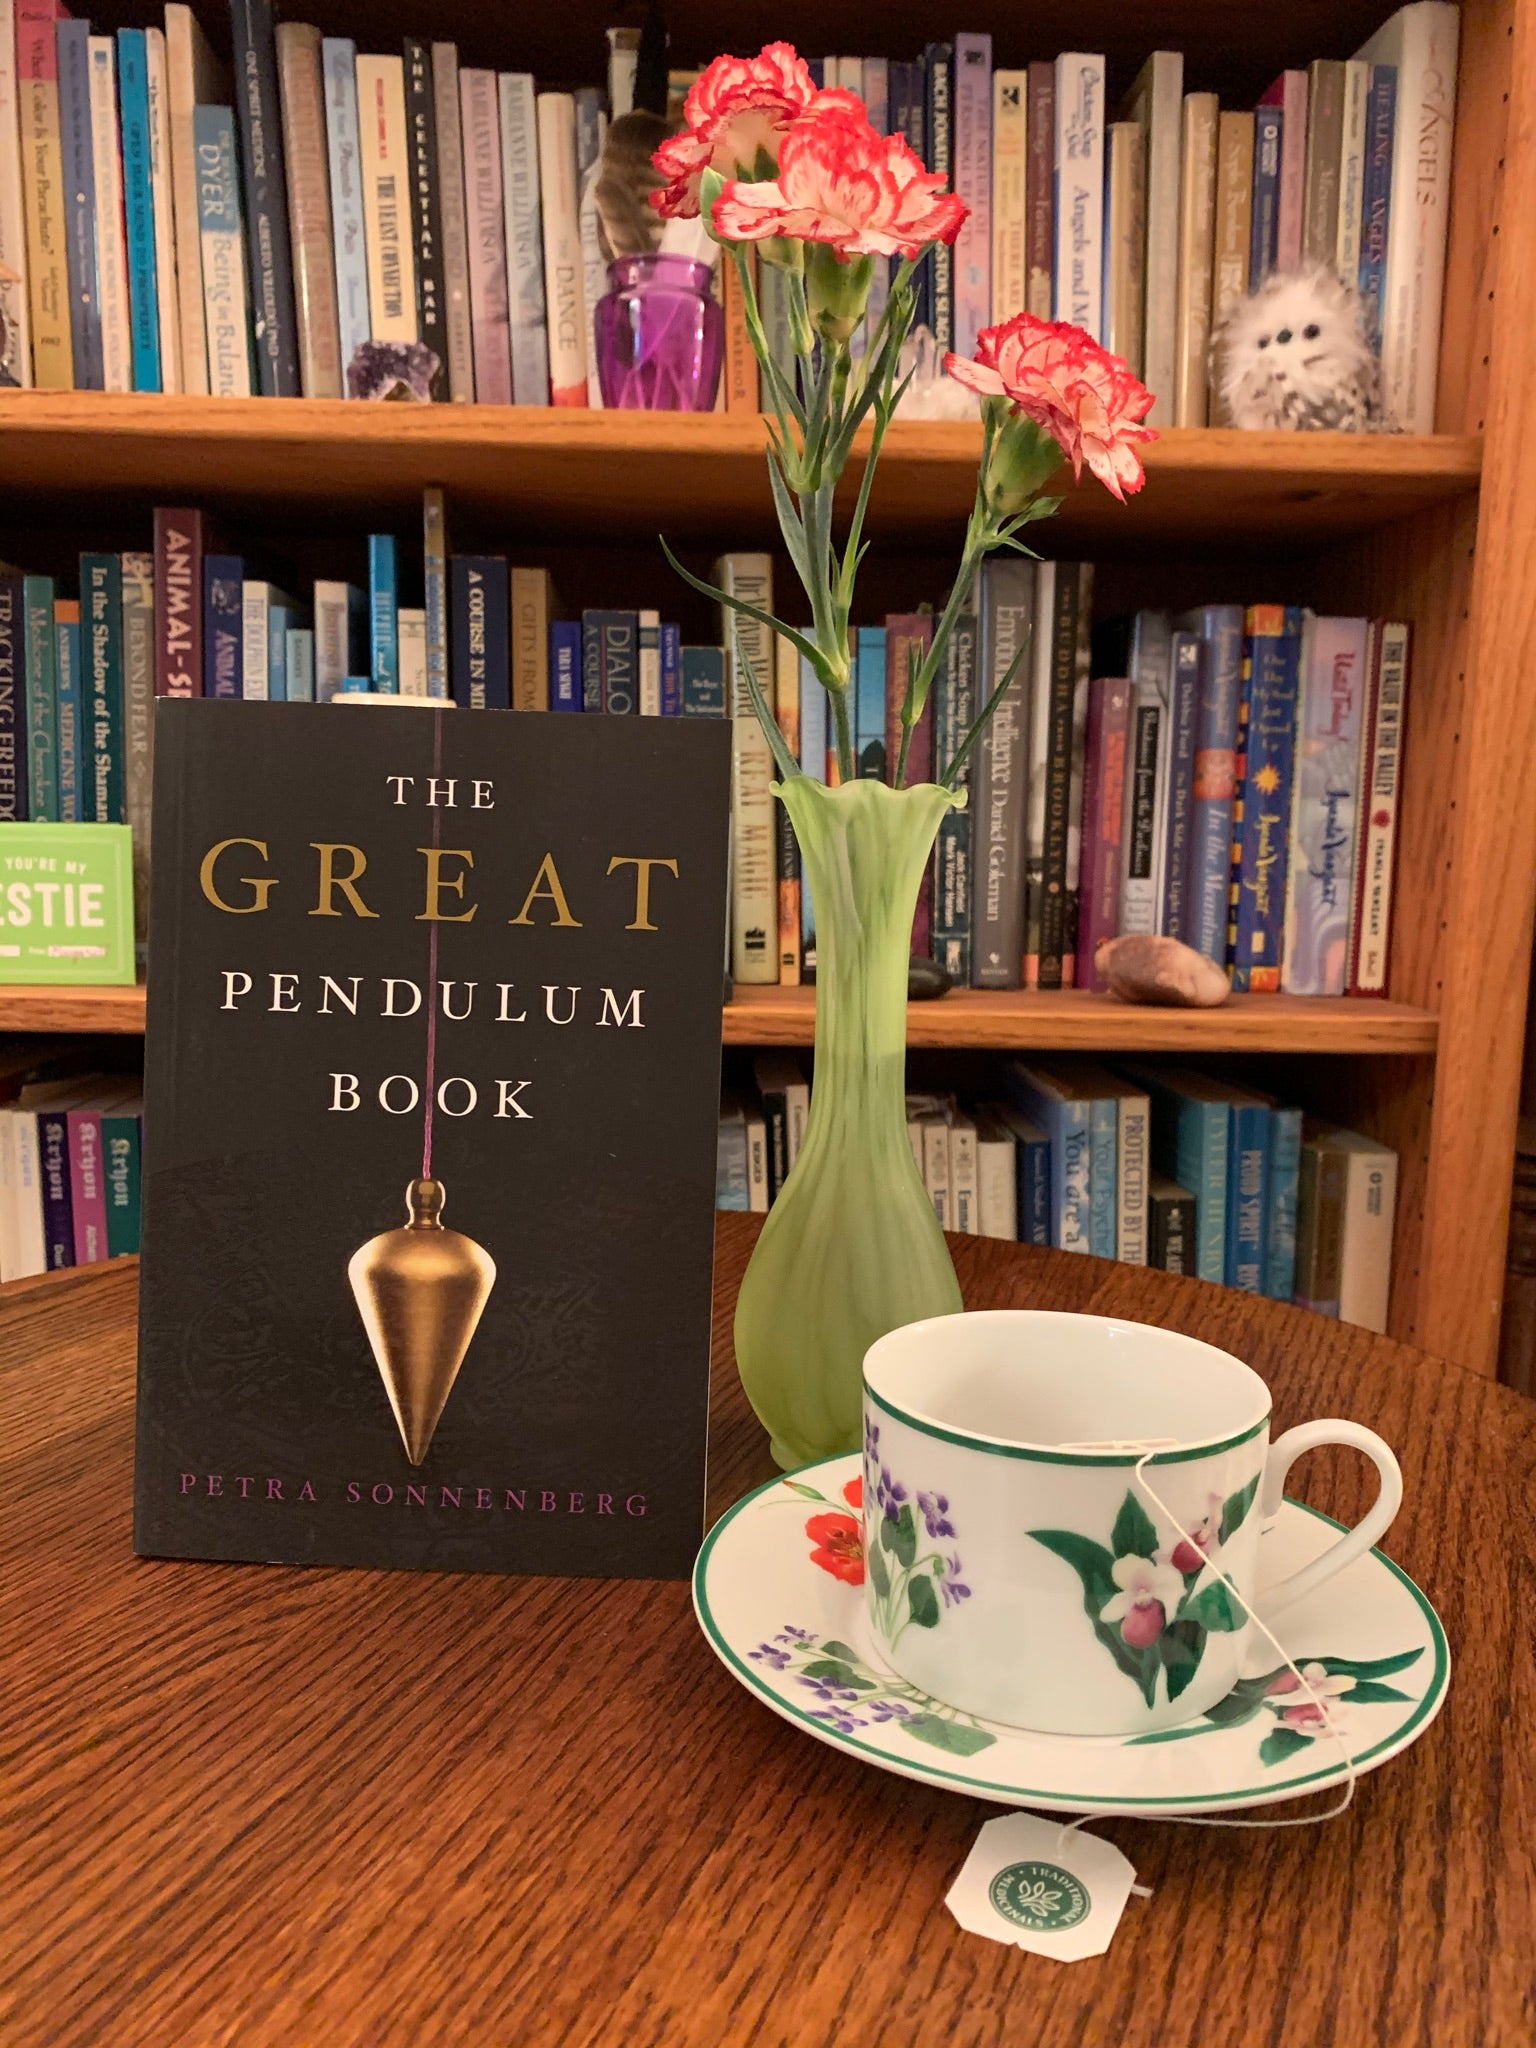 This is a book called The Great Pendulum Book by Petra Sonnenberg. It is an in-depth look at the use of the pendulum as a divination tool.